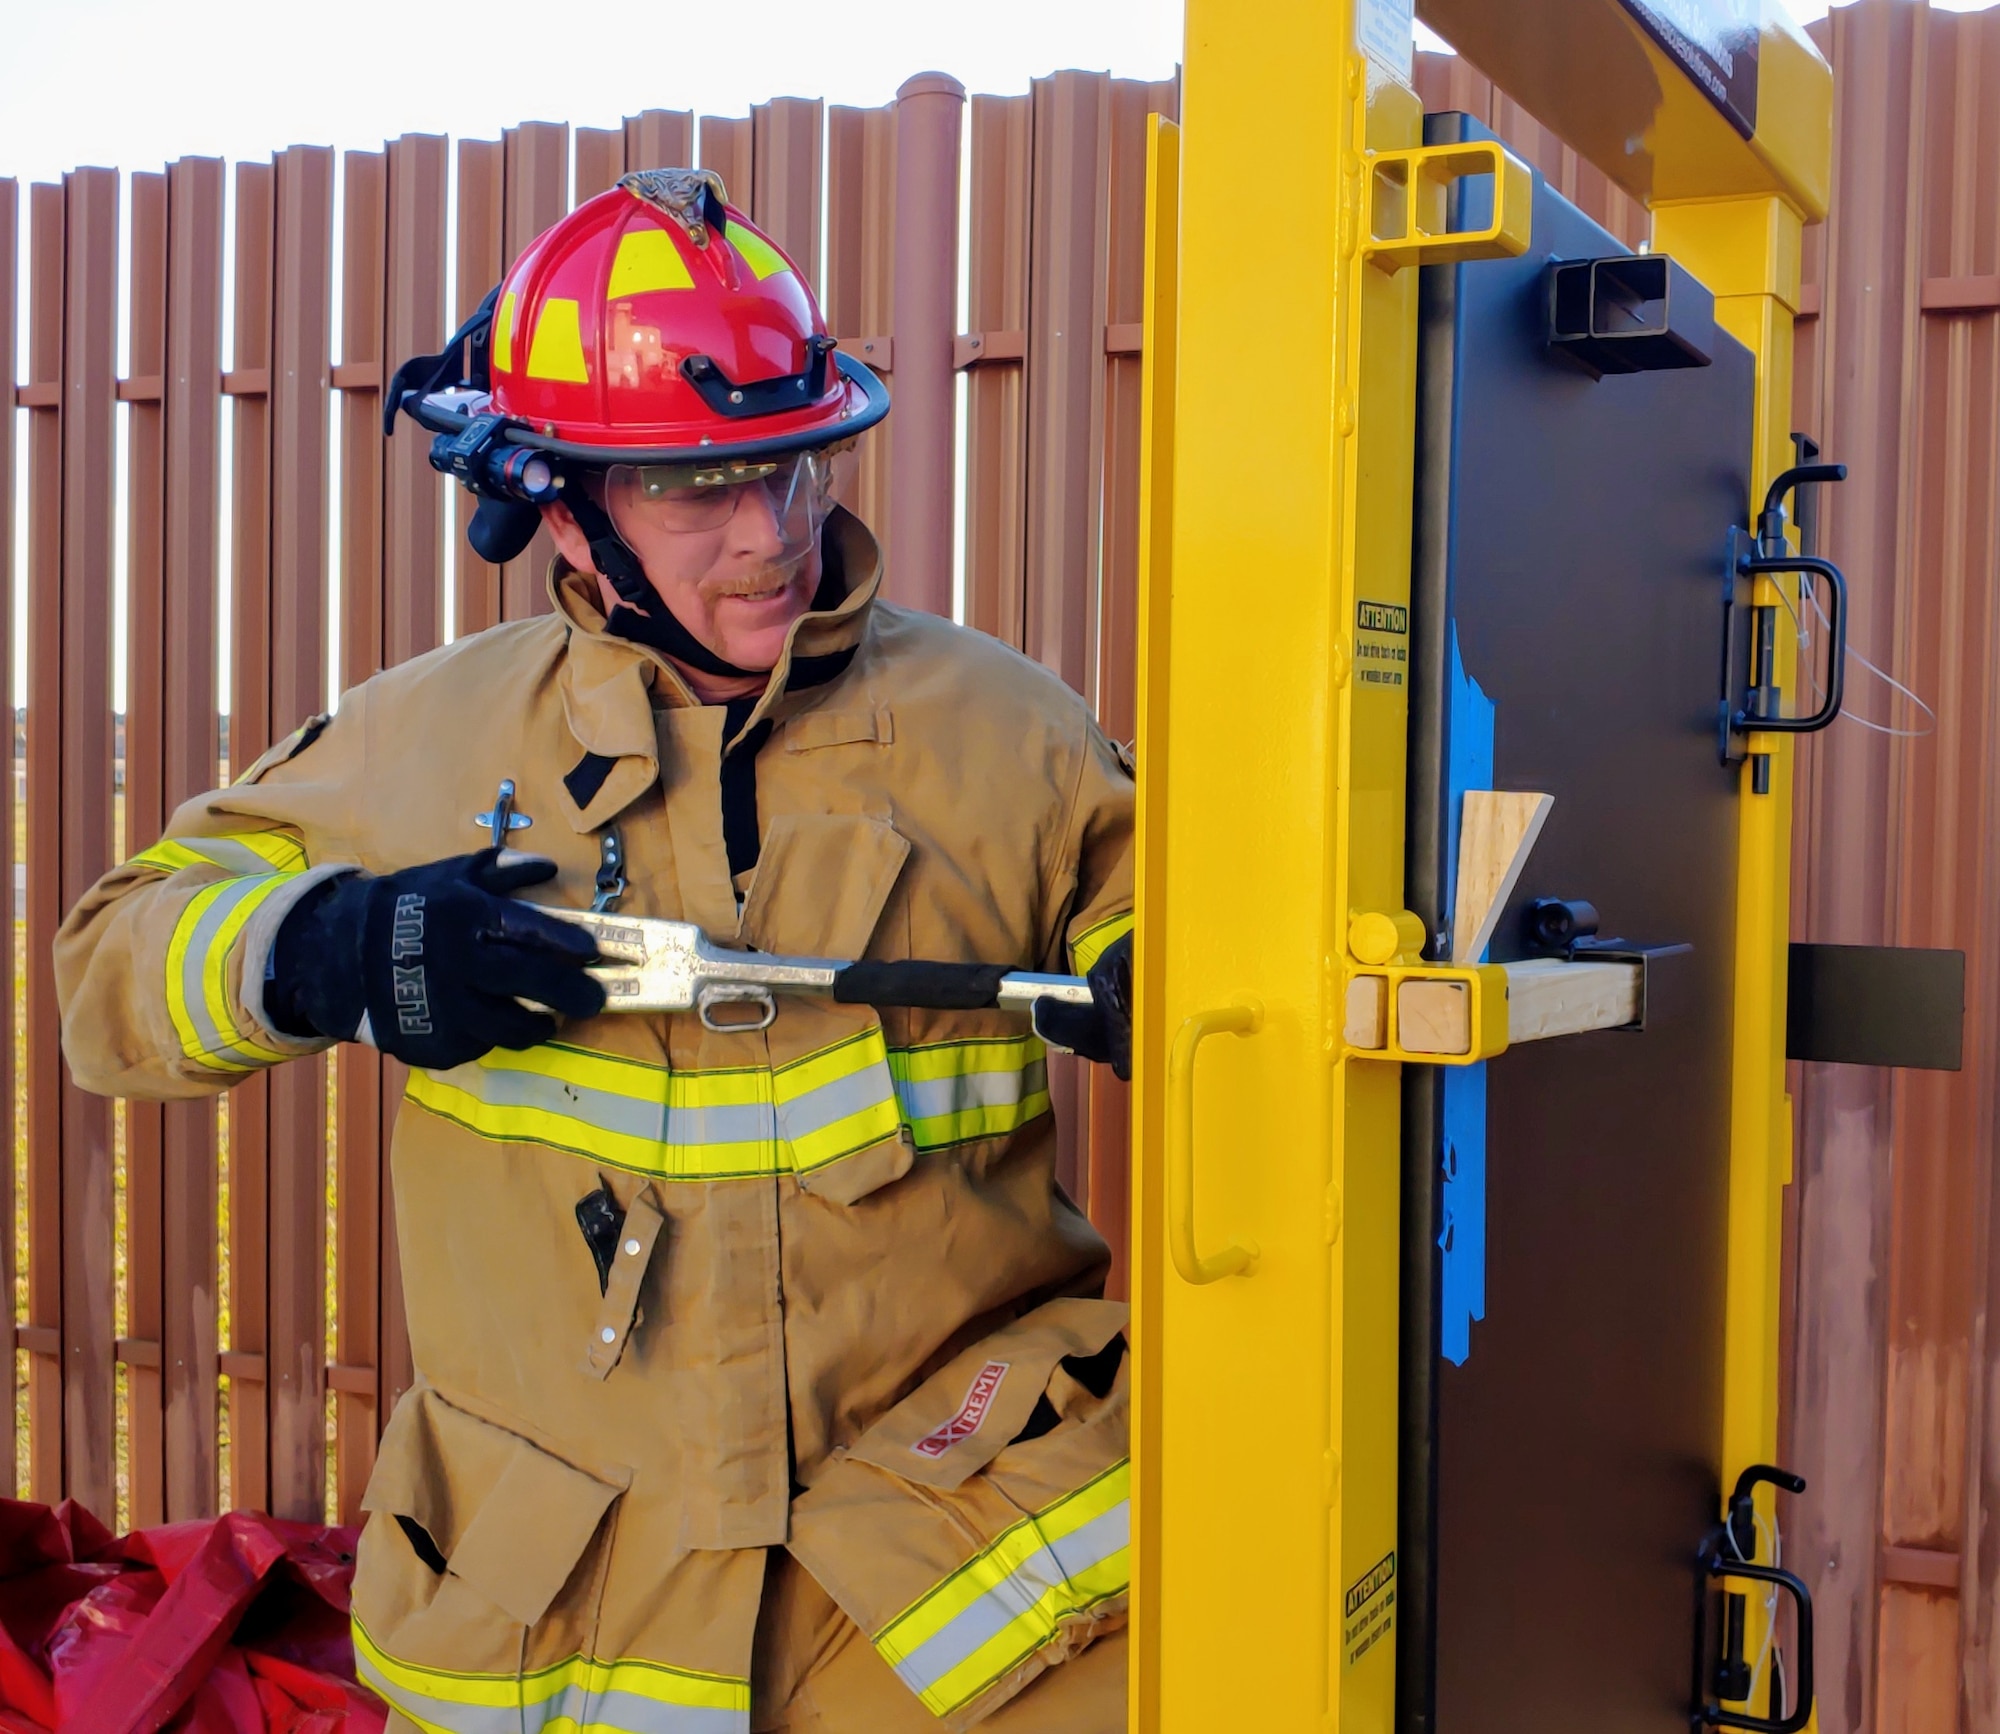 Photo shows firefighter using door simulator to practice forcible entry.